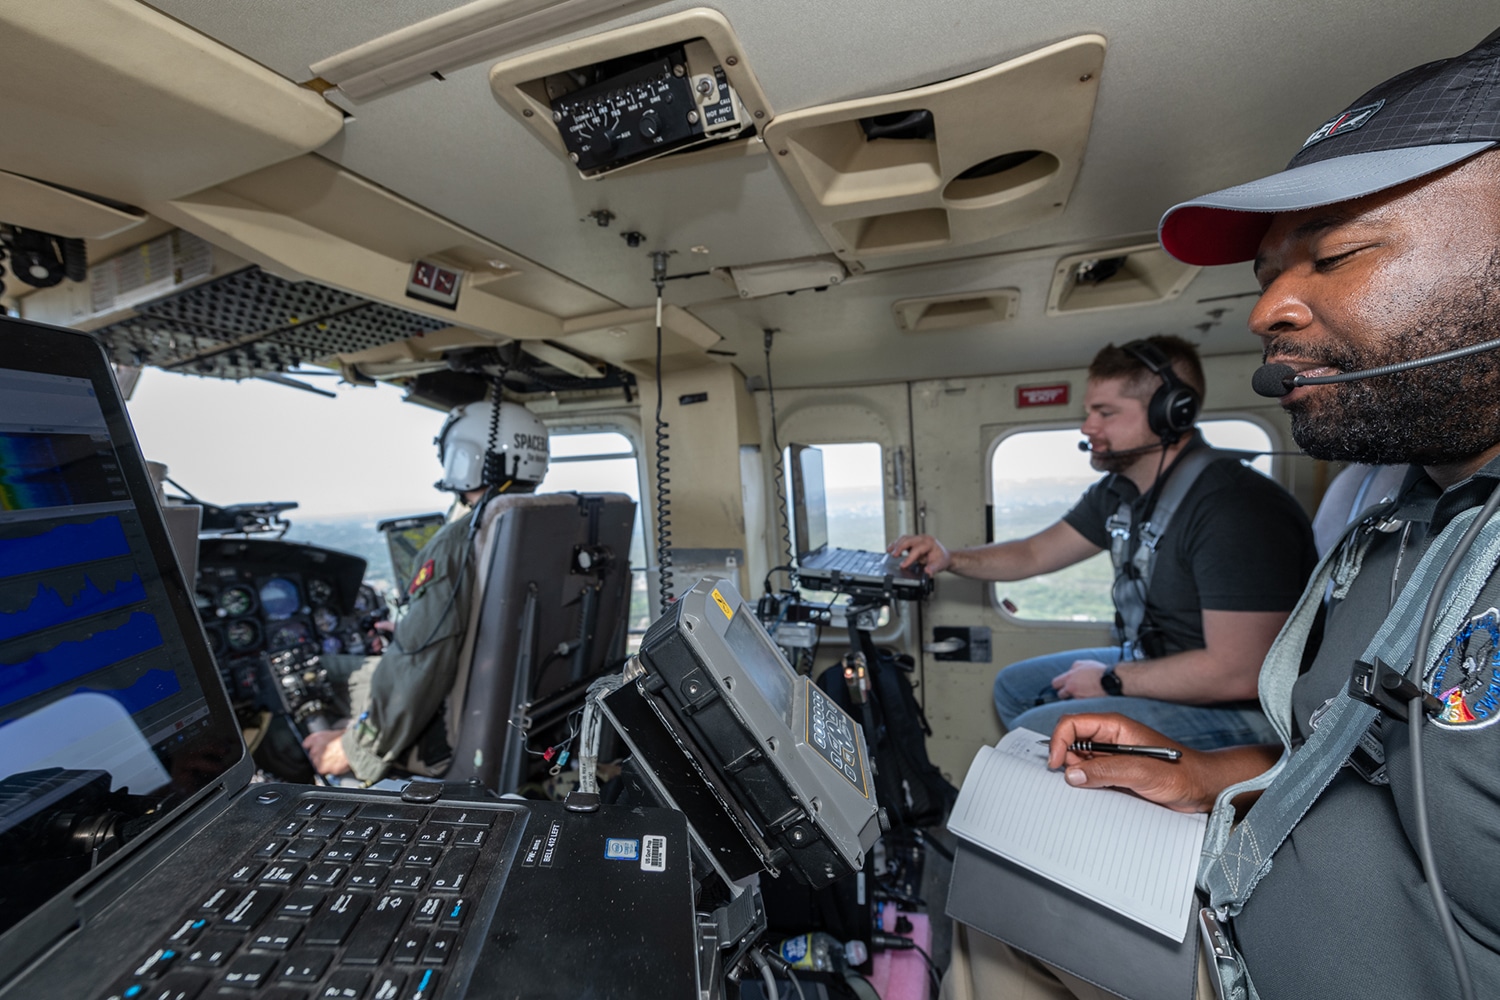 Aerial Measuring System aircraft and team members during the Cobalt Magnet exercise in May 2022. (NNSA)